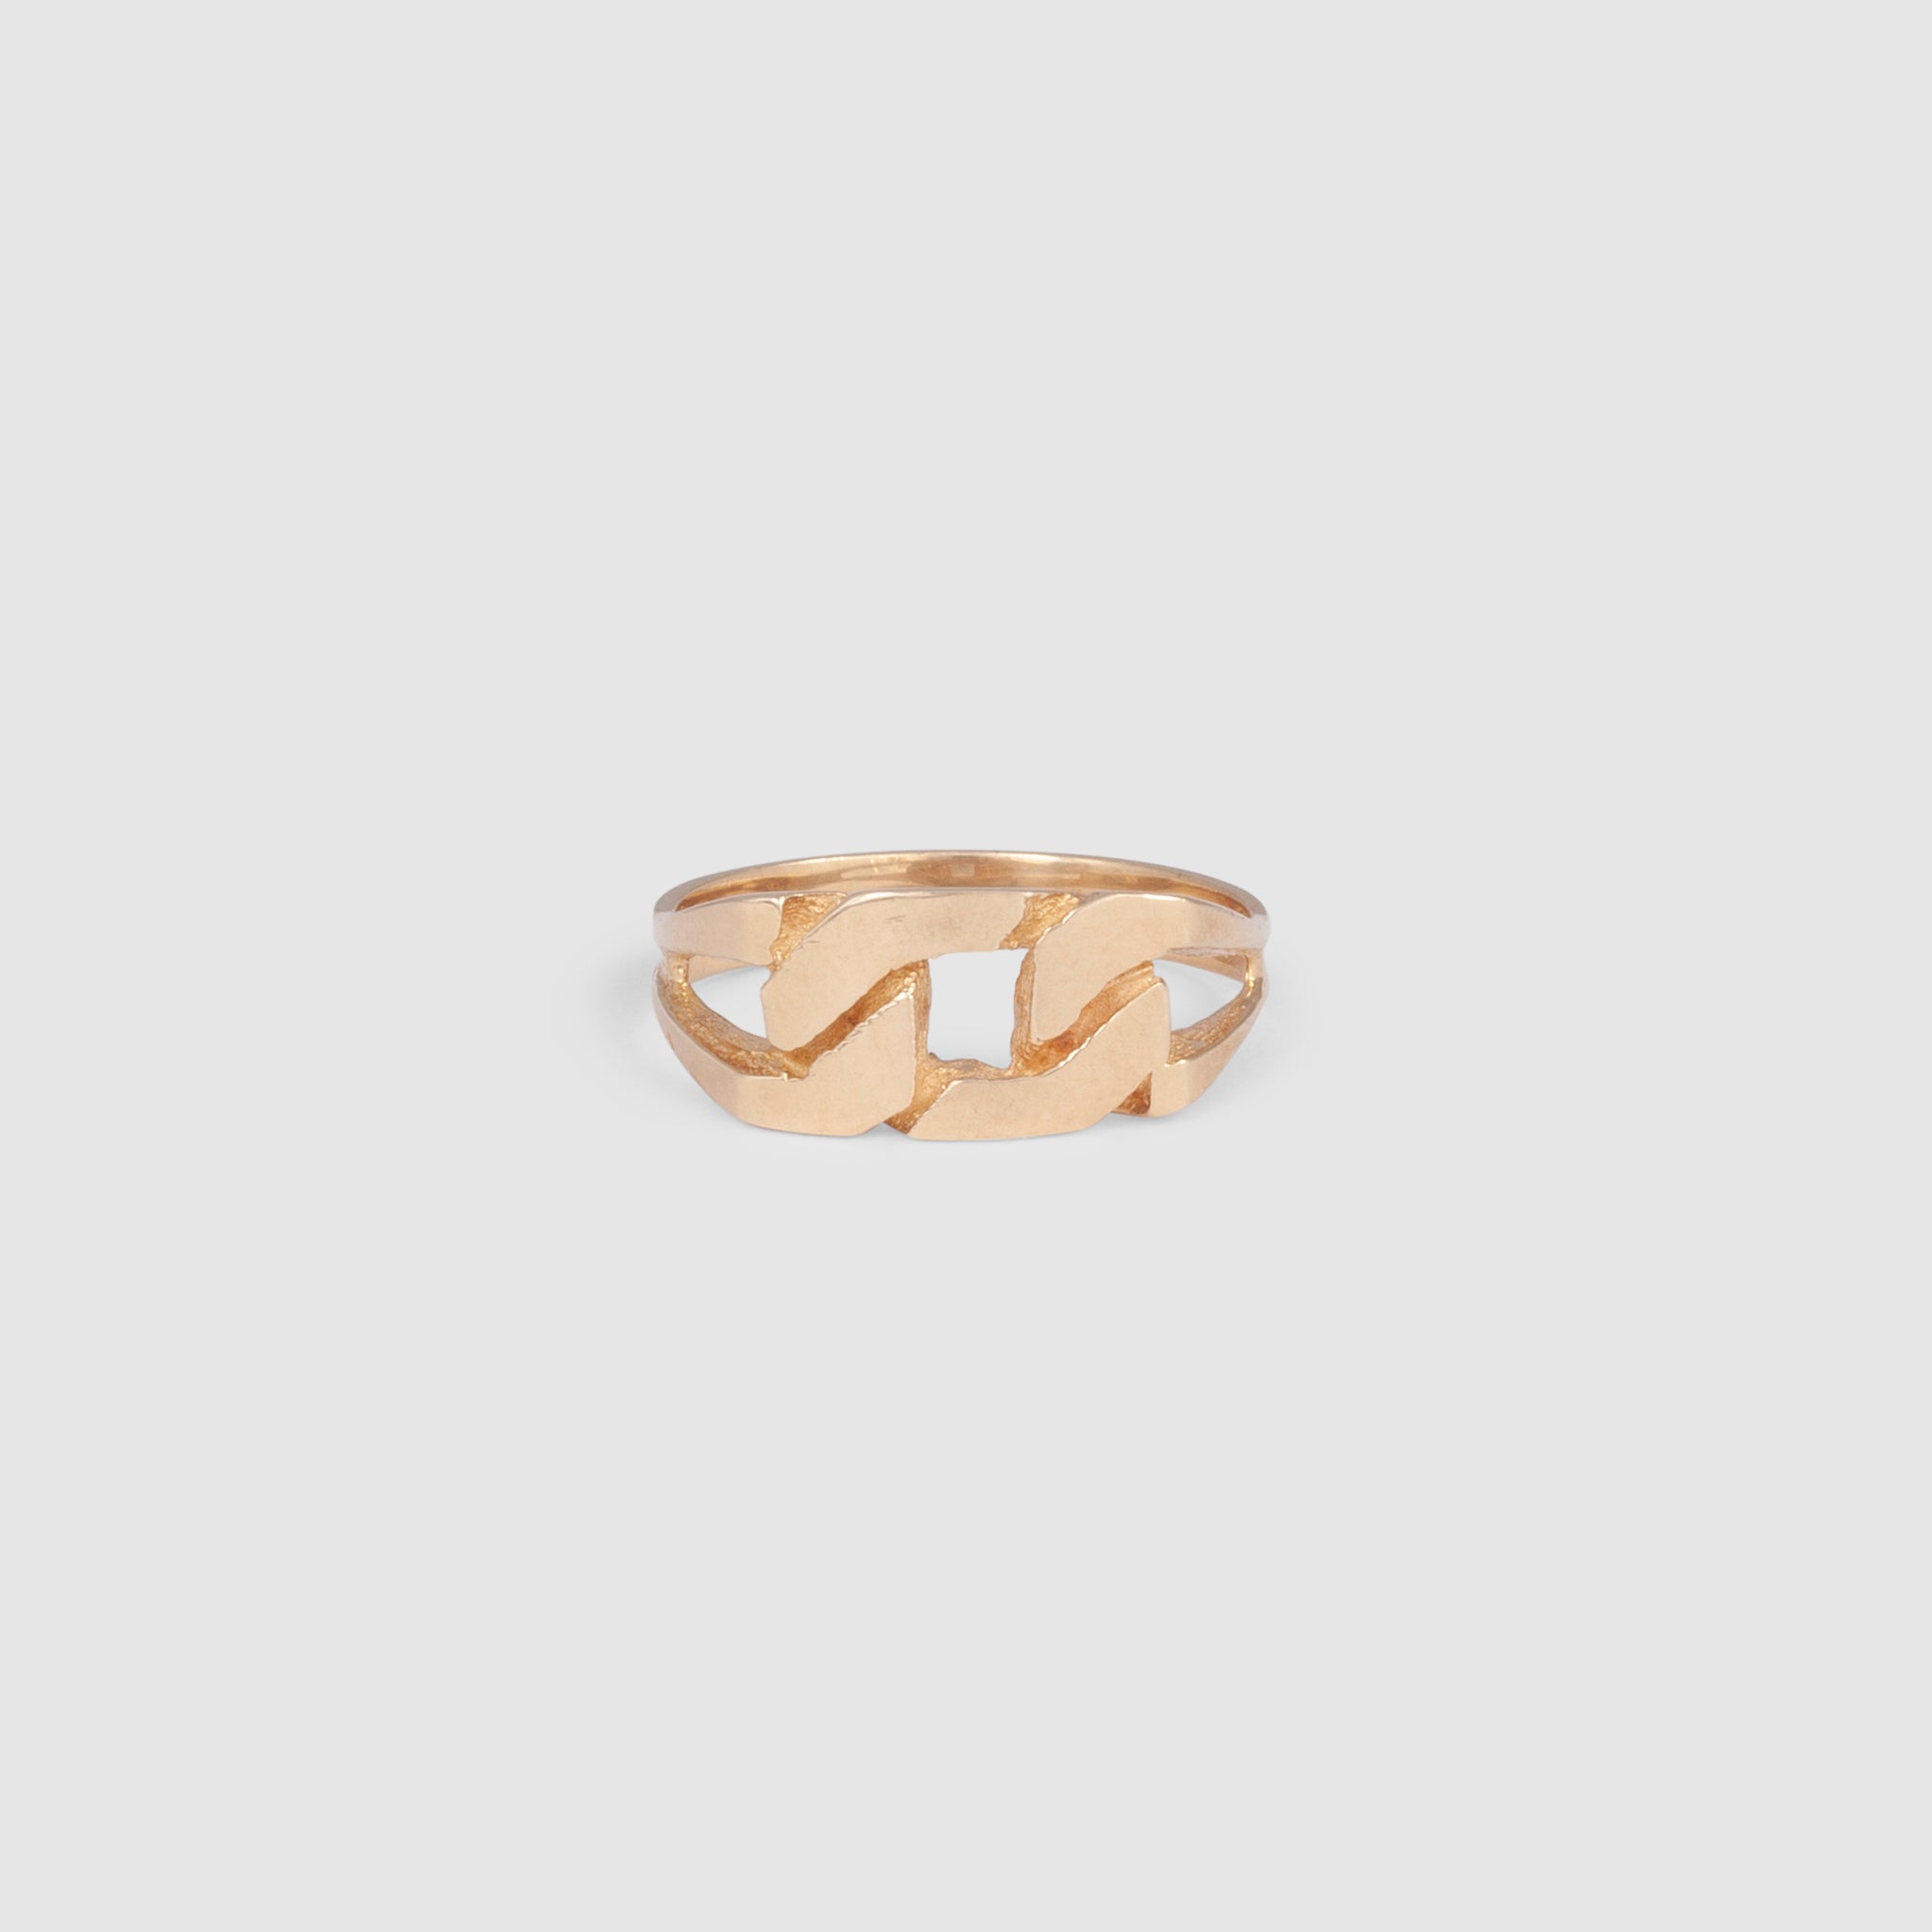 10K Solid Yellow Gold ring with the detail of a Cuban link